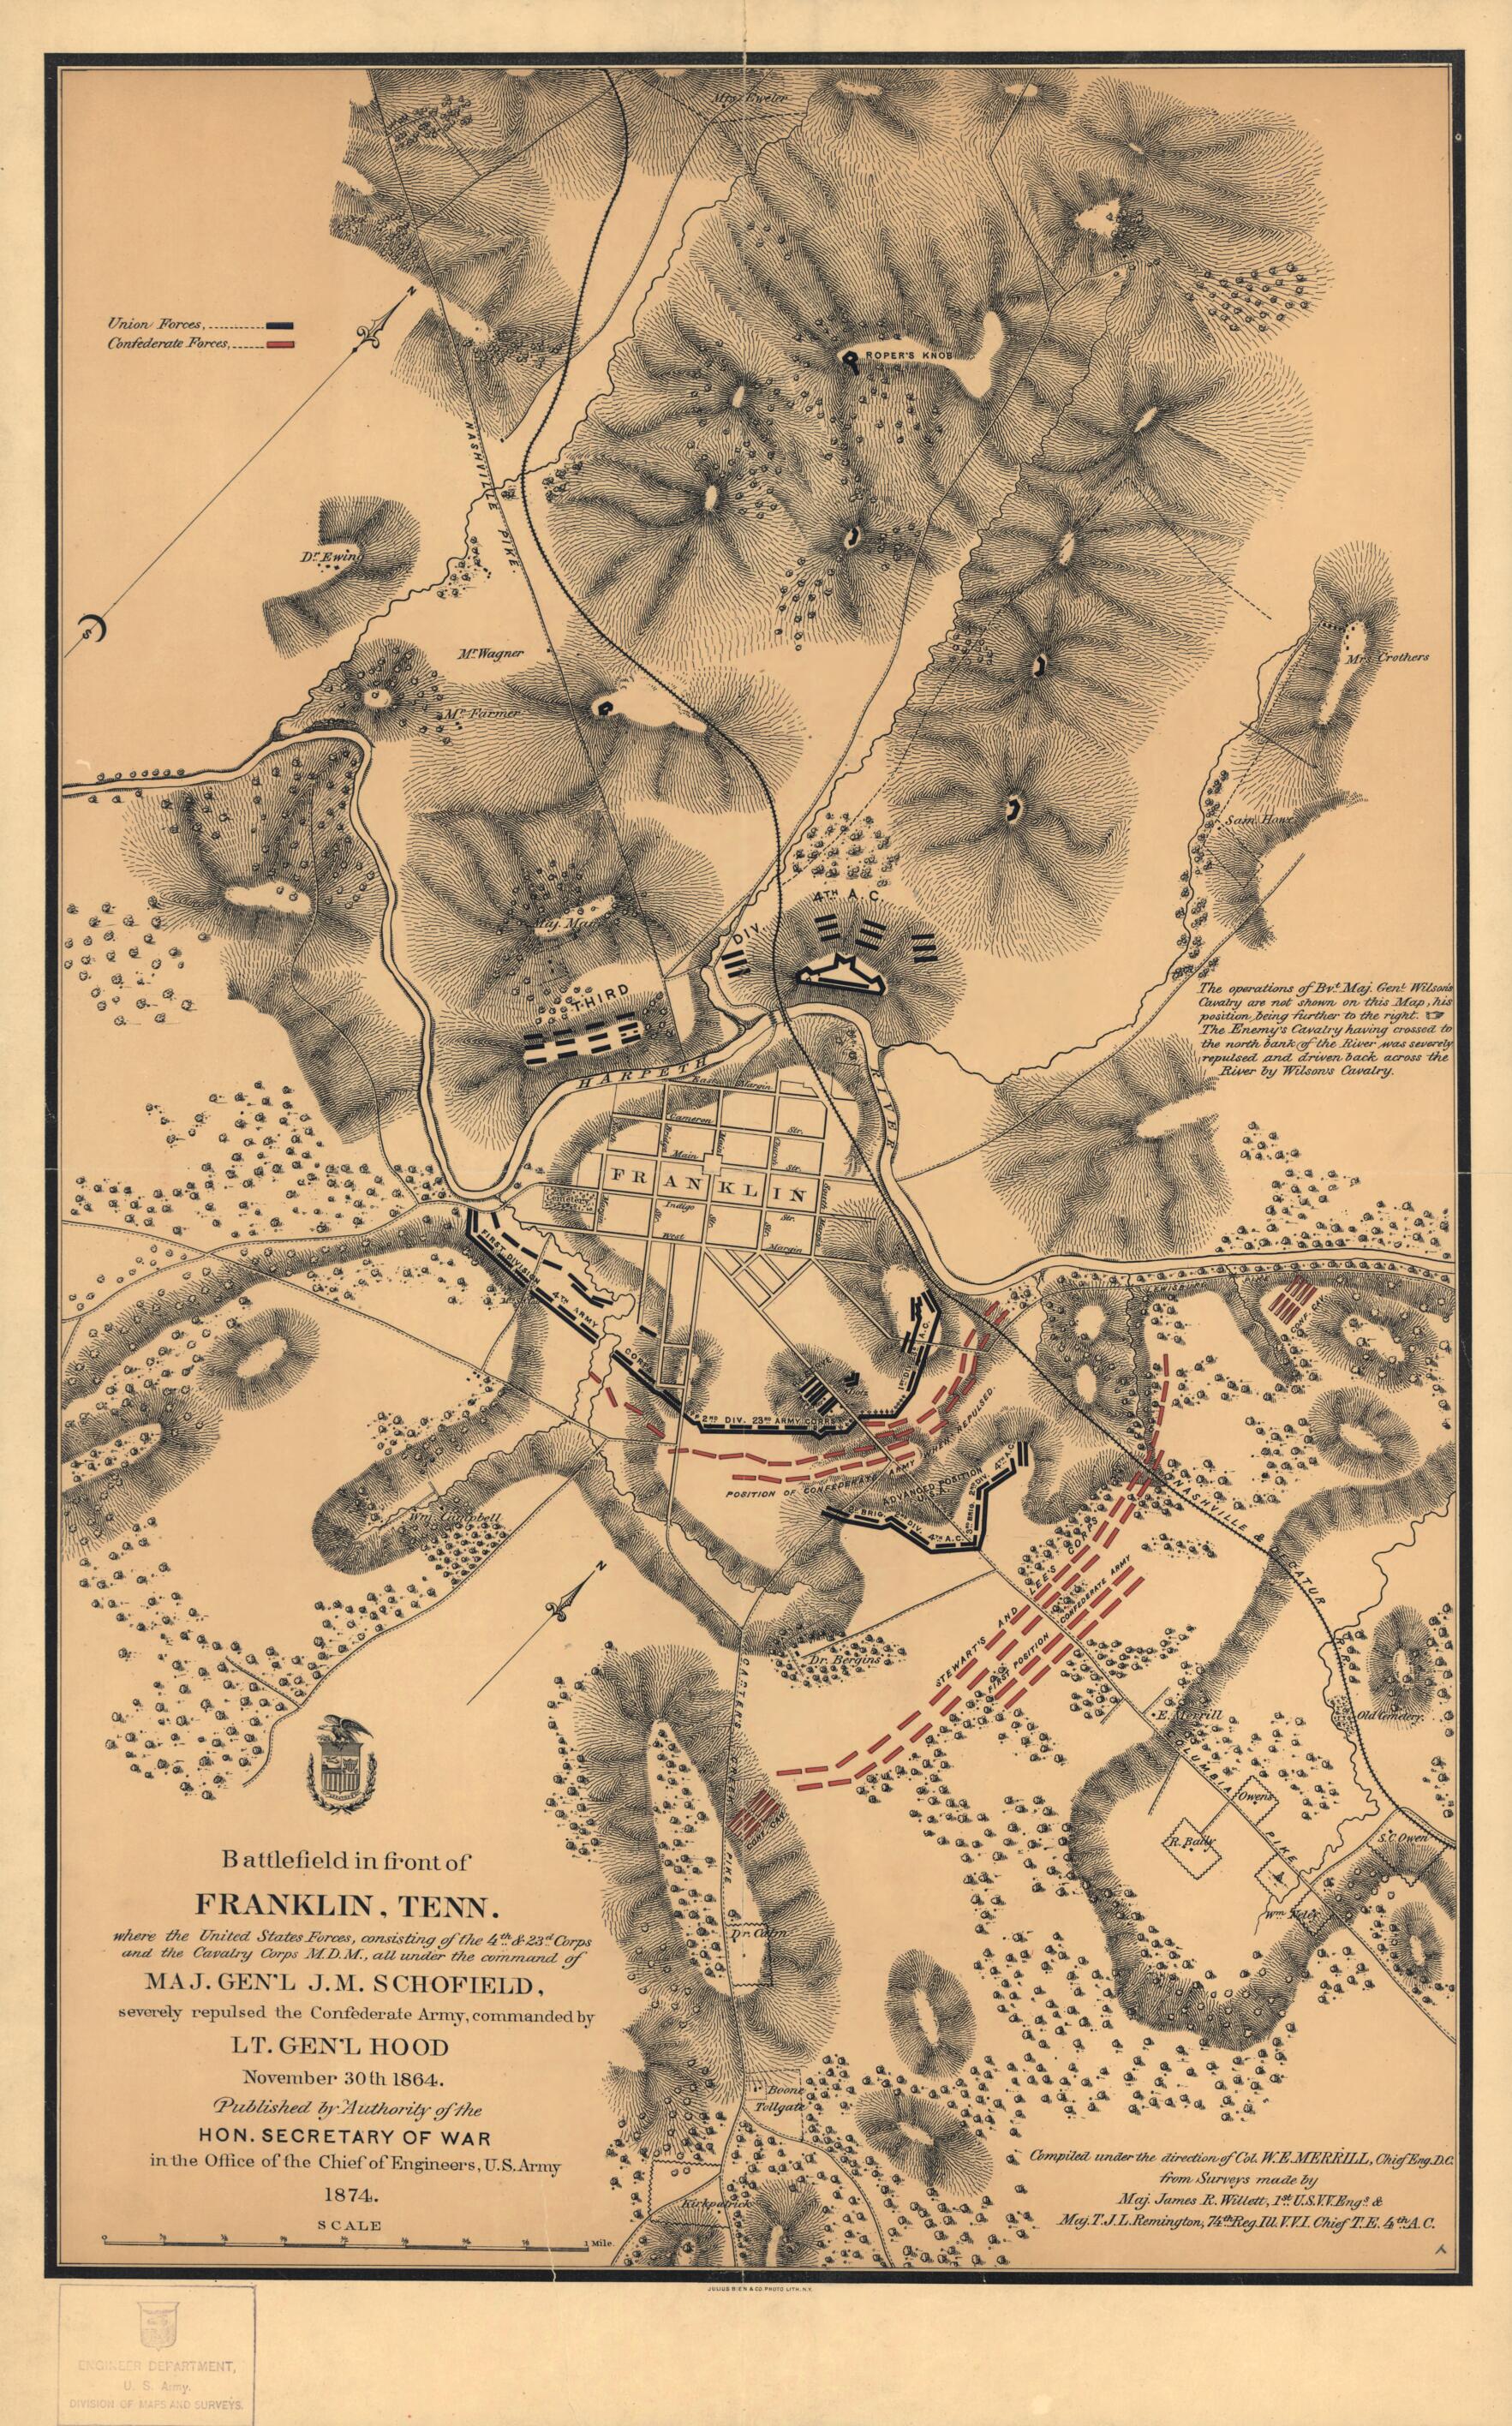 This old map of Battlefield In Front of Franklin, Tennessee Where the United States Forces, Consisting of the 4th. &amp; 23d. Corps and the Cavalry Corps M.D.M., All Under the Command of Maj. Gen&